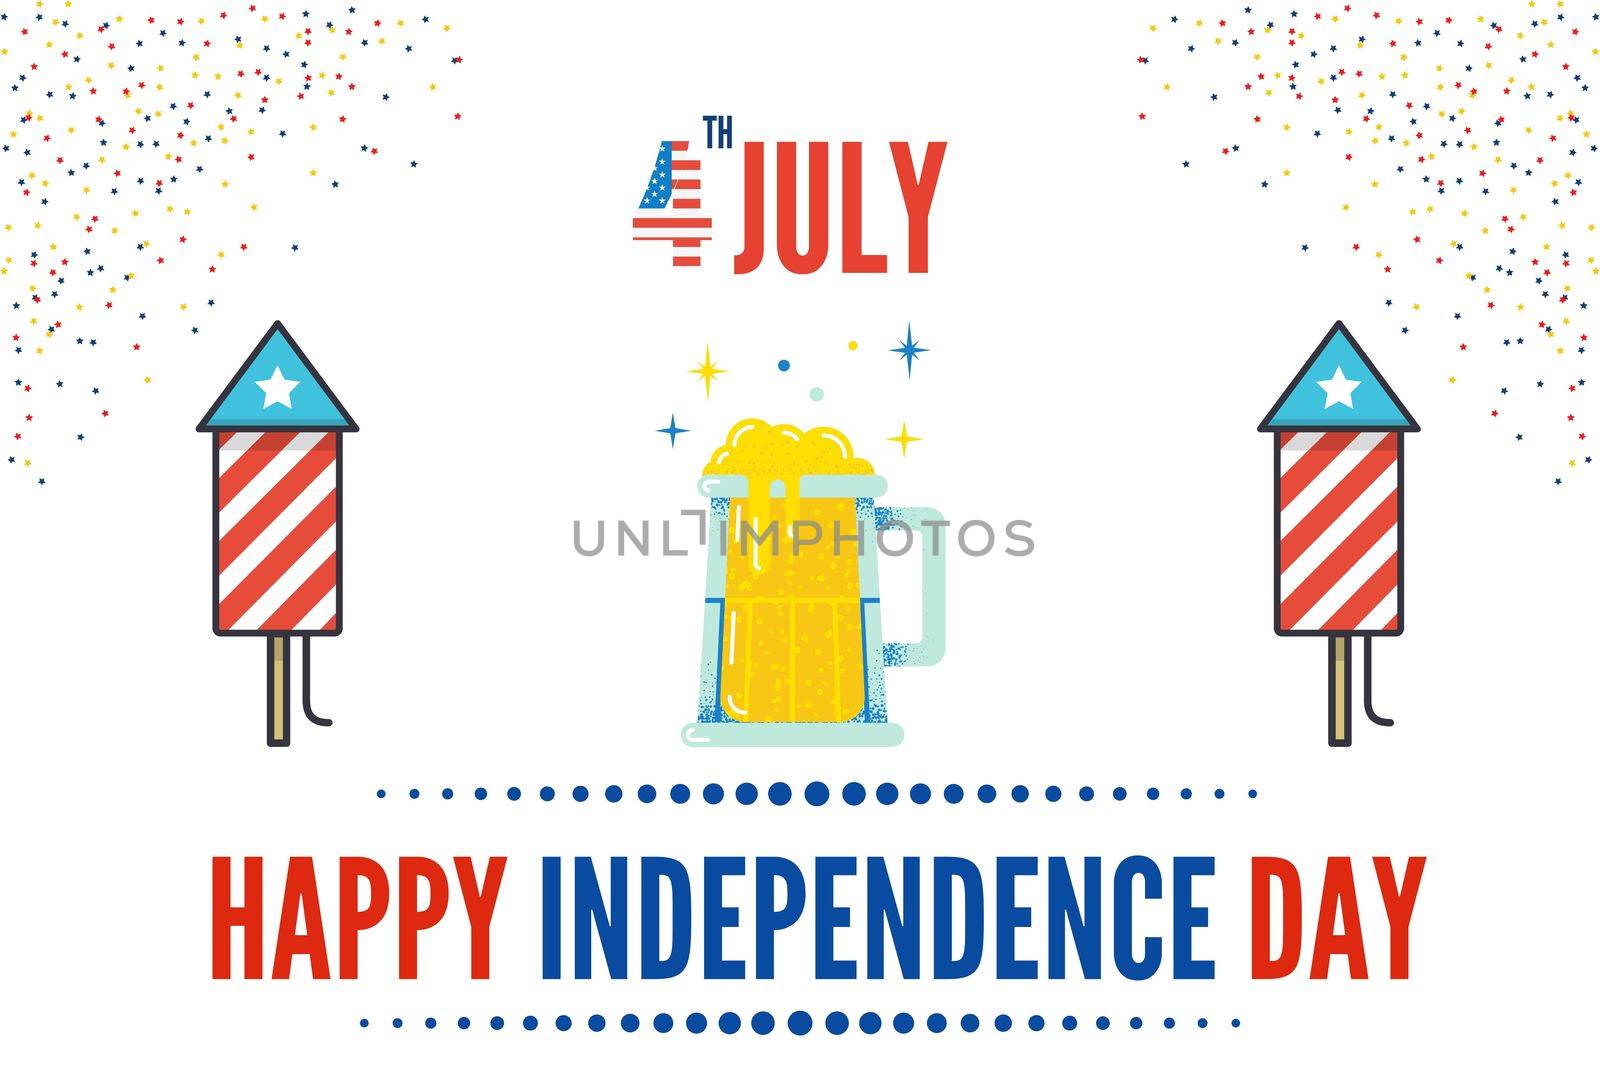 4 th of July Independance Day of United States of America (USA) illustration. This day is celebrated as the birth of American independence